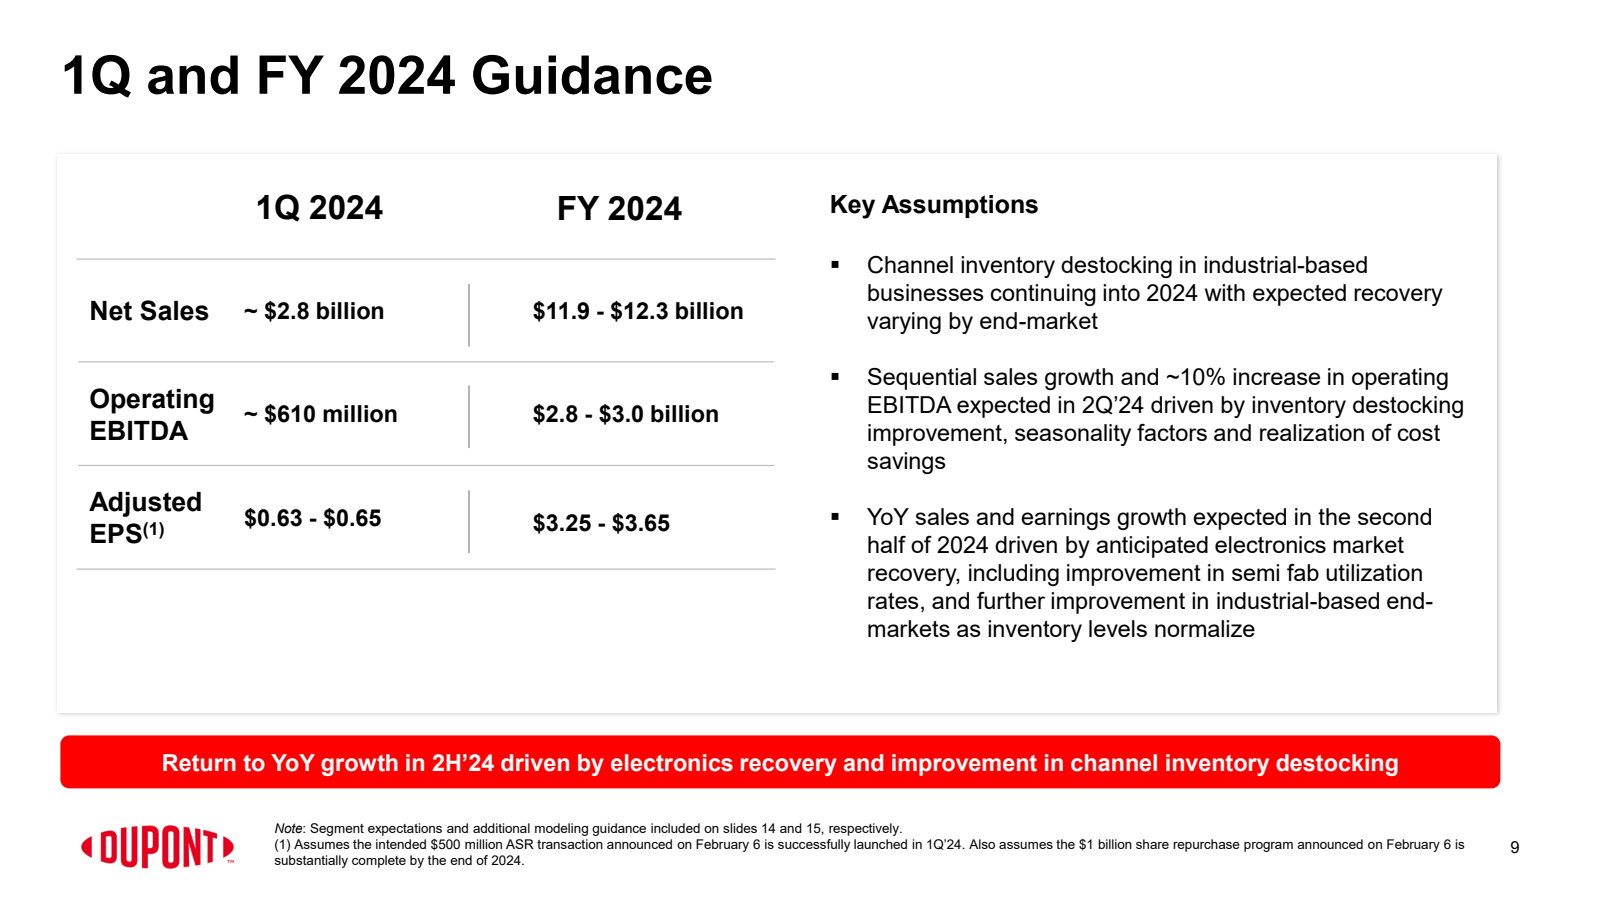 1Q and FY 2024 Guida